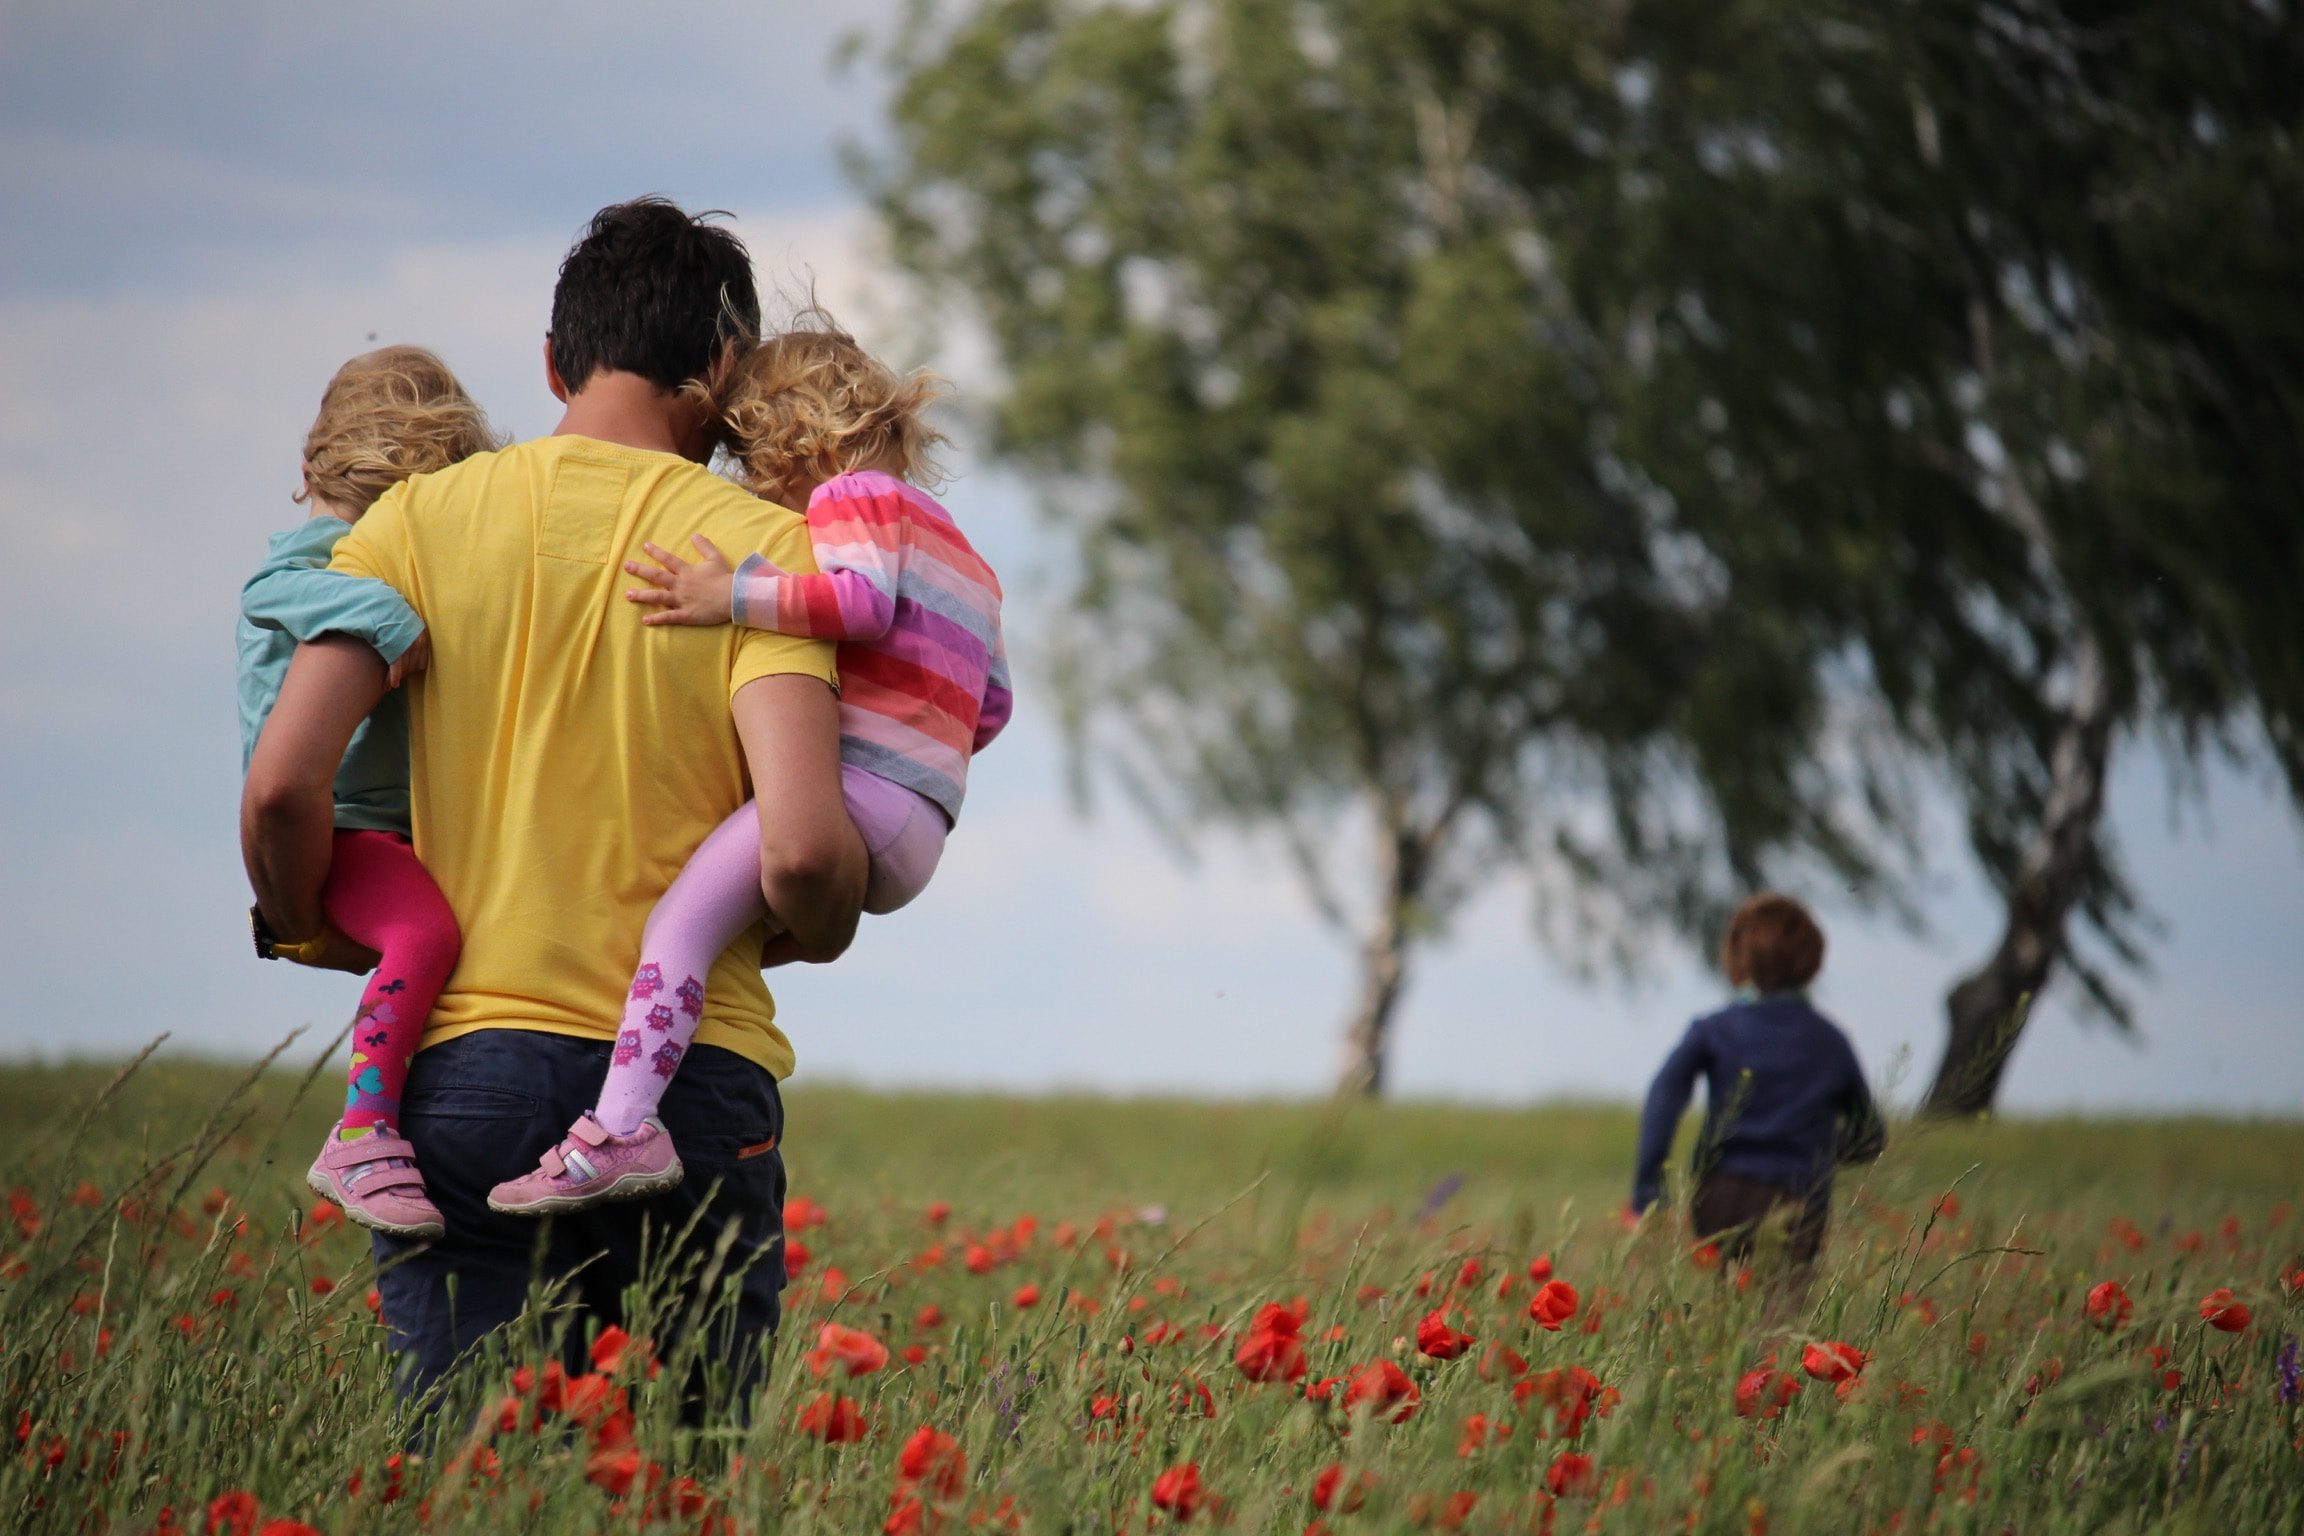 A father carries his two children in a field of red flowers, with another child running ahead to a nearby tree.